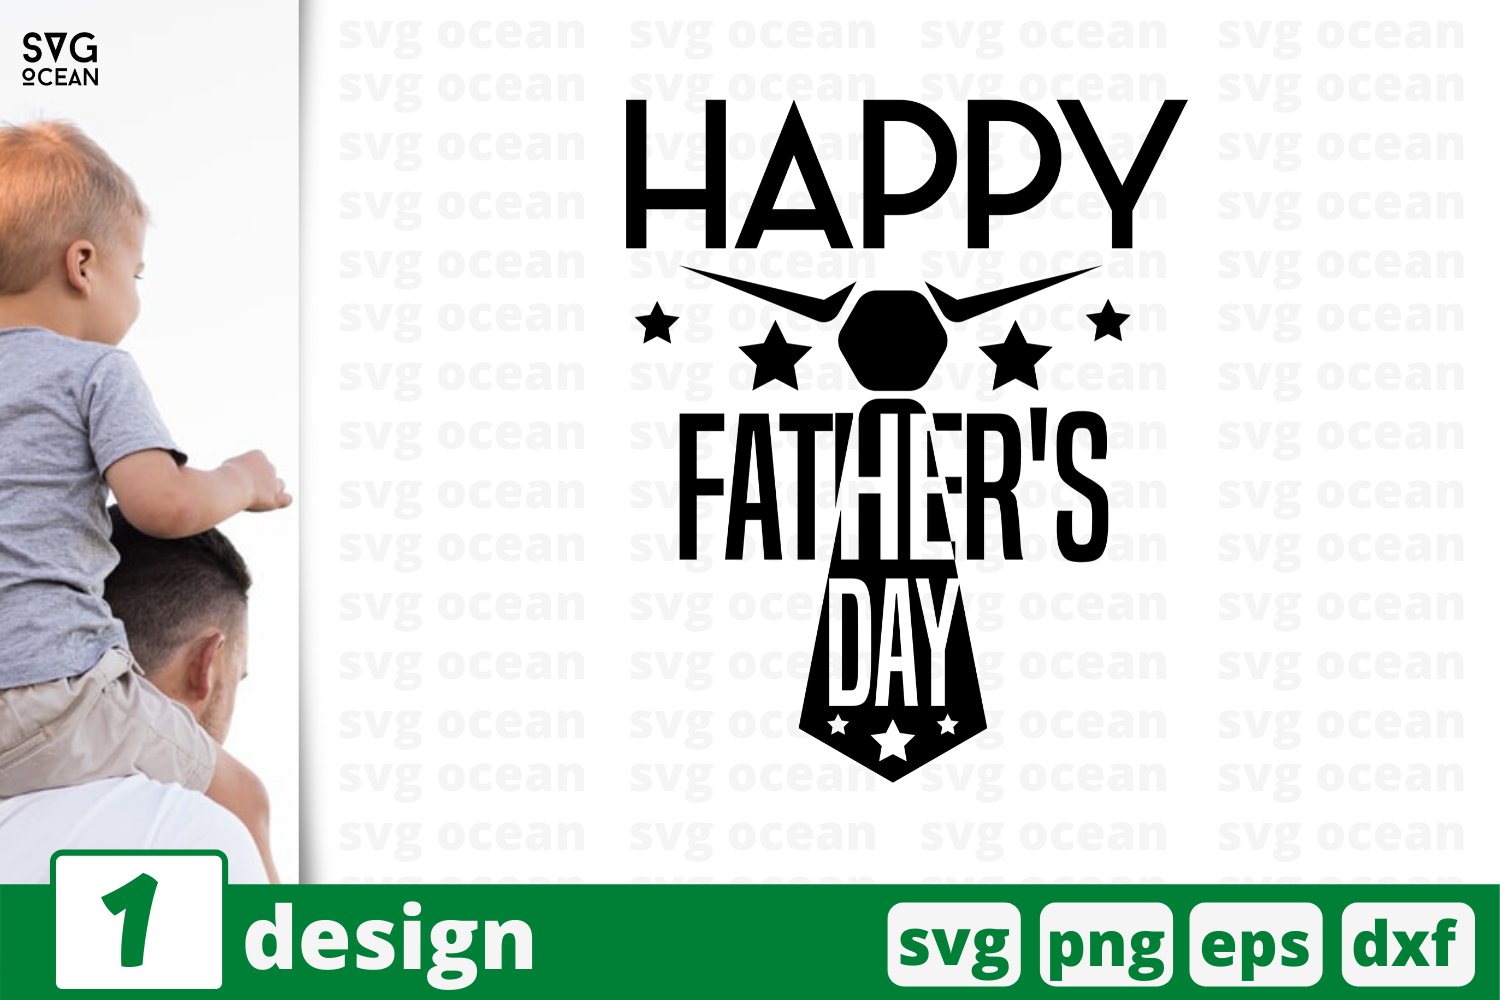 Download 1 Happy Father S Day Svg Bundle Father S Day Quotes Cricut Svg By Svgocean Thehungryjpeg Com